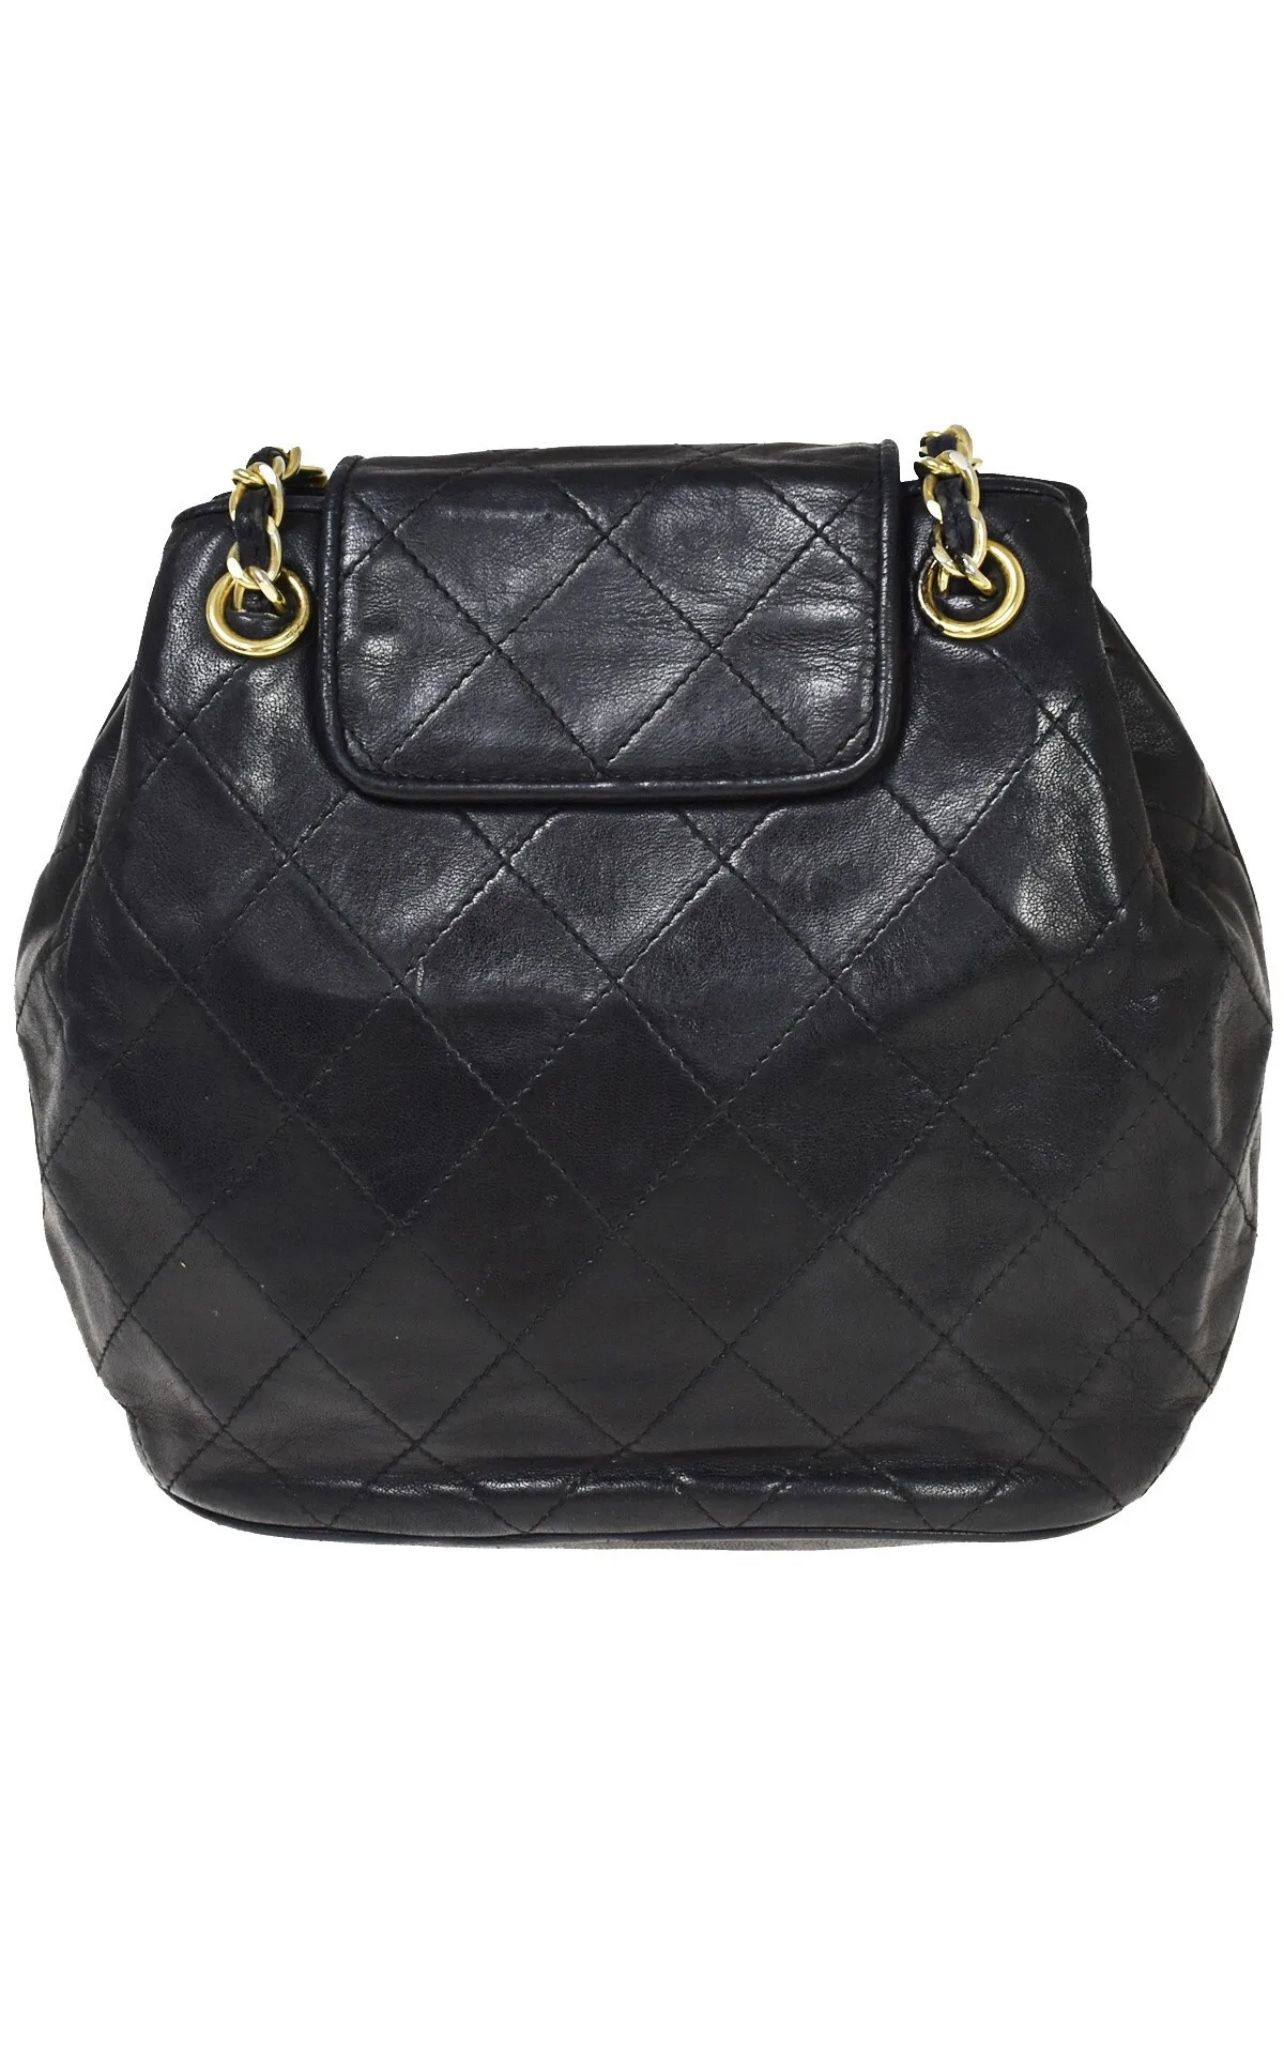 Chanel Studded Chevron Flap Bag of Black Calfskin with Silver Tone Hardware, Handbags & Accessories Online, Ecommerce Retail